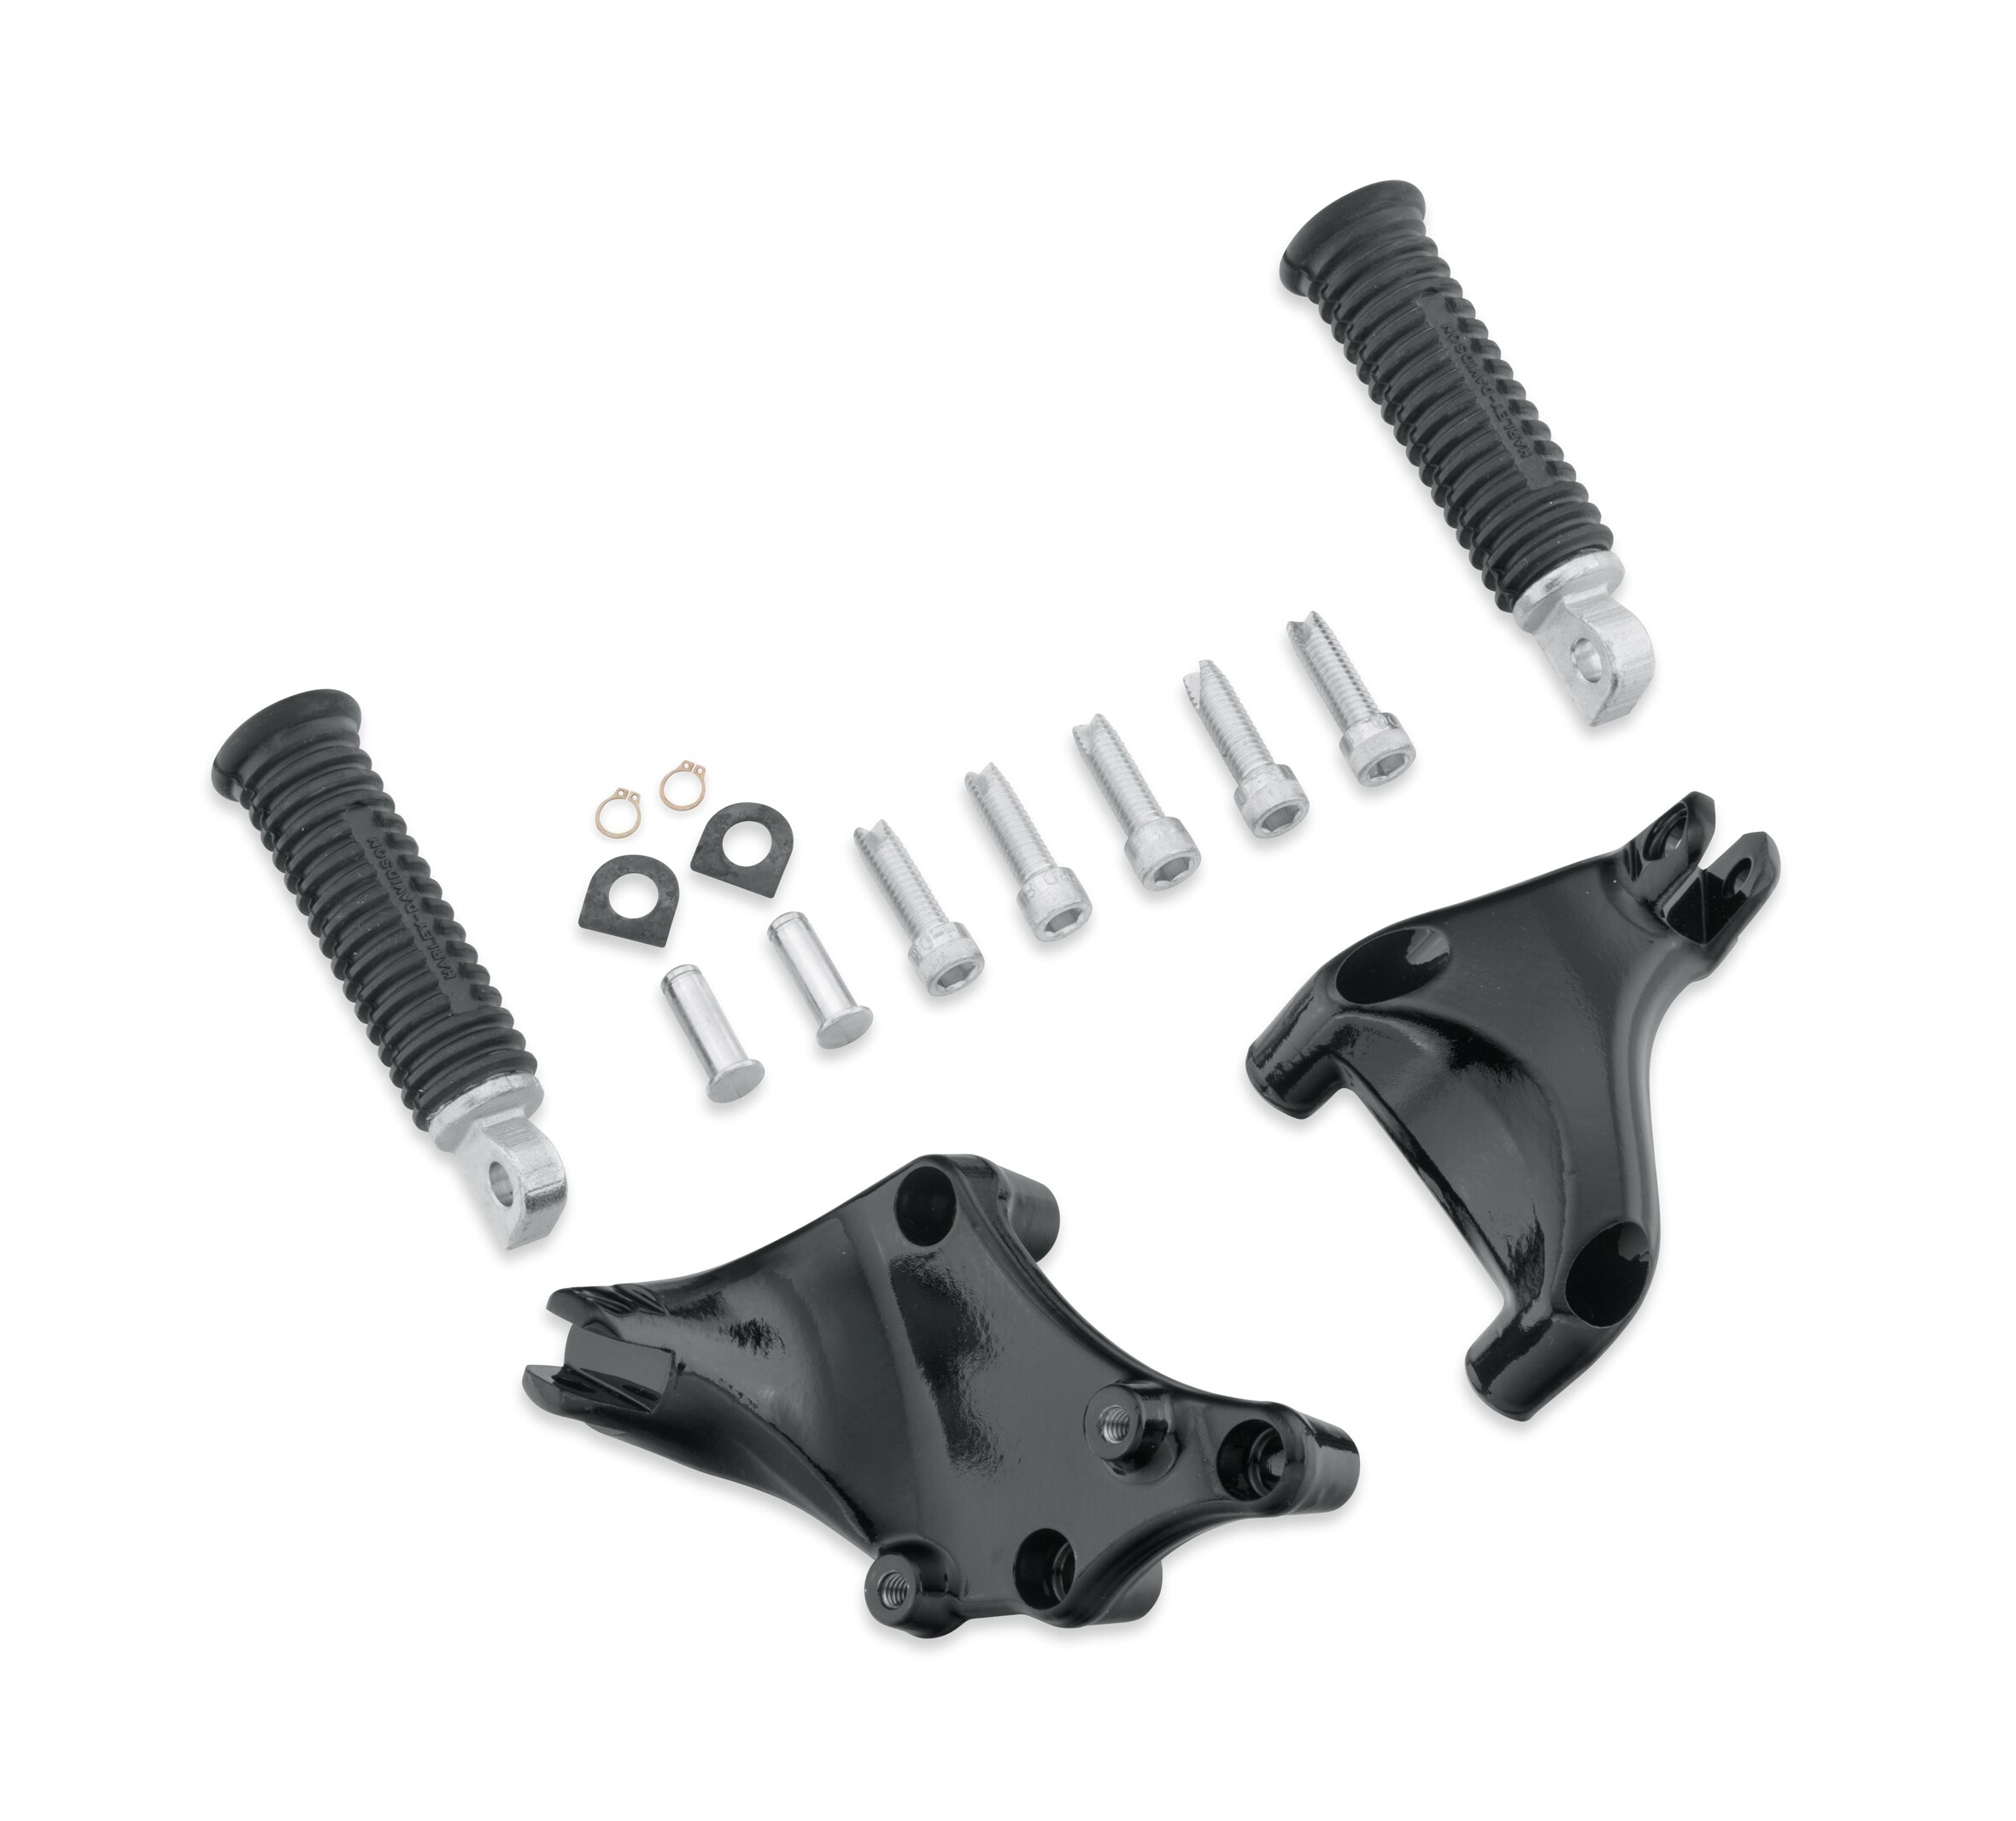 Pilot Shifter Pegs With Bolt Fit For Harley Touring Softail Fatboy Dyna Fat  Bob